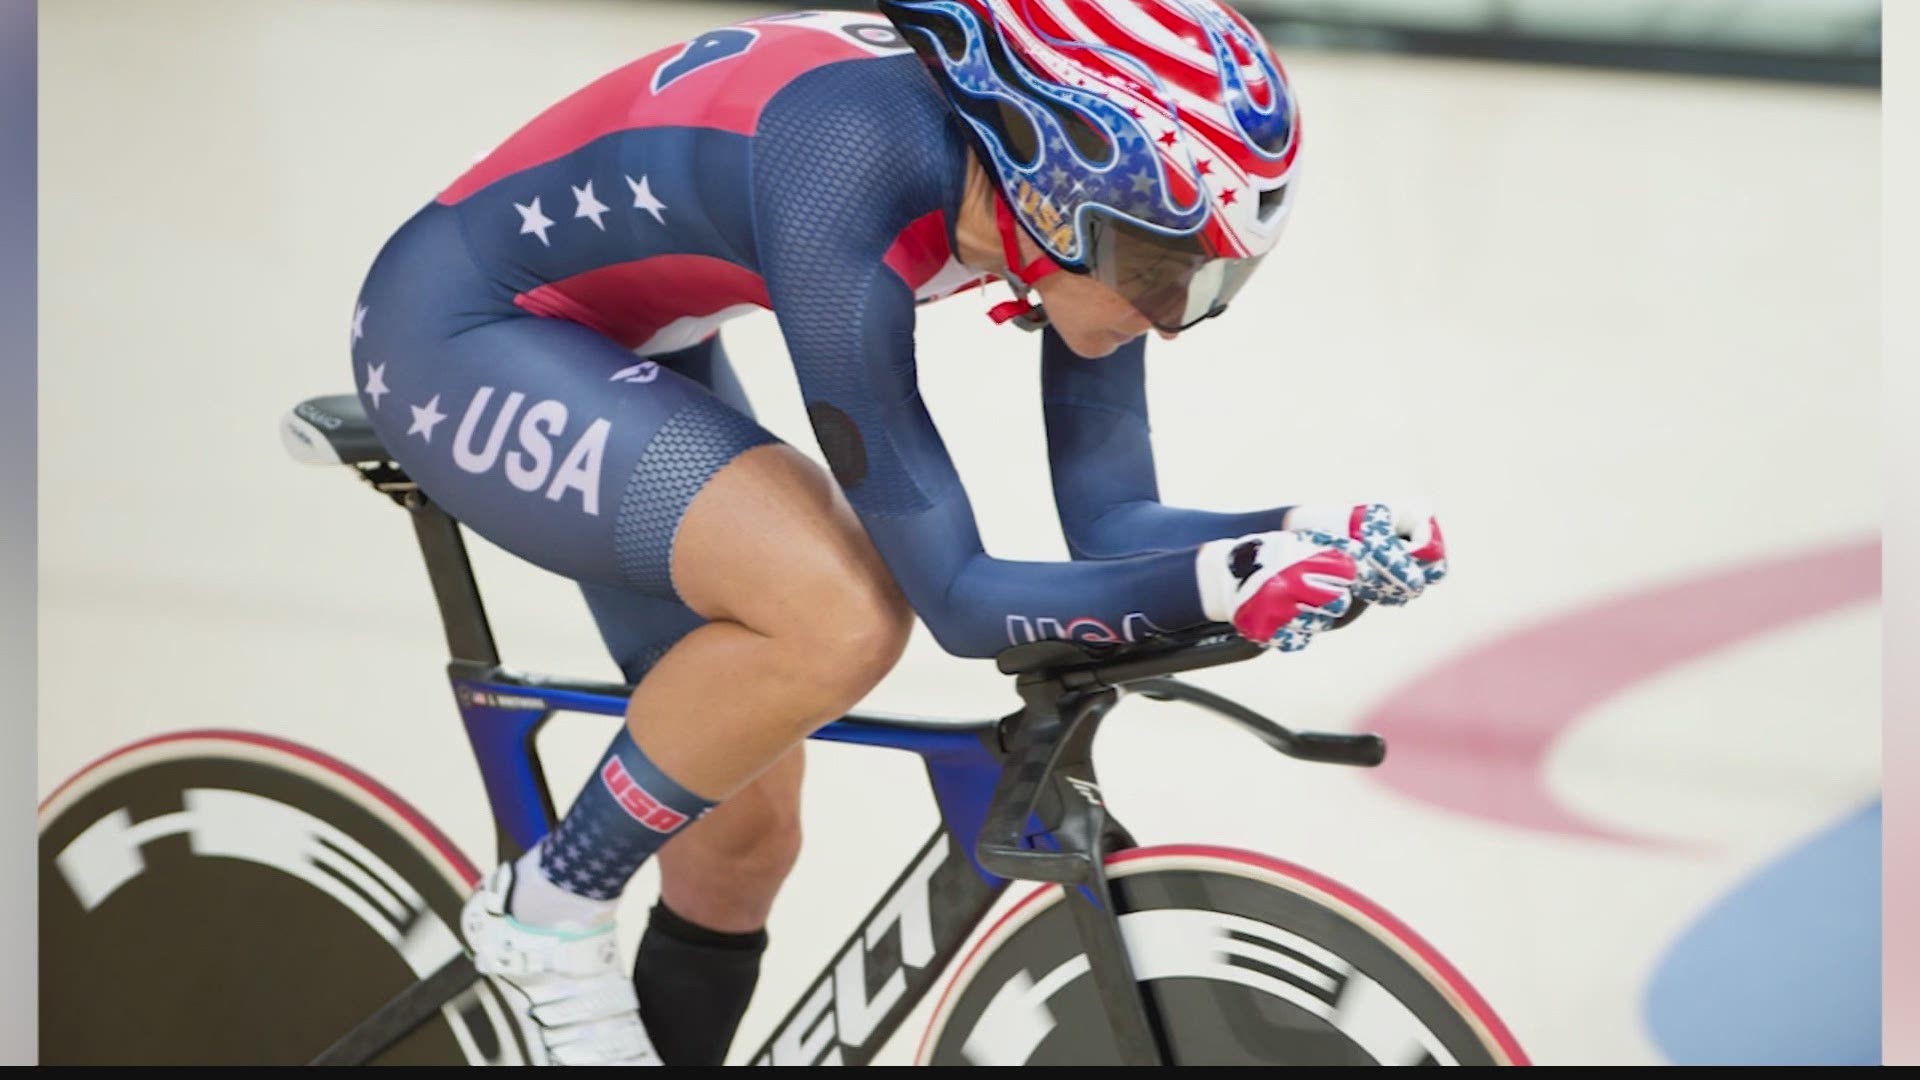 Next weekend, U.S. Paralympic Cycling will make its way to Huntsville's Research Park. Over 100 paralympic athletes will be competing for a qualifying spot